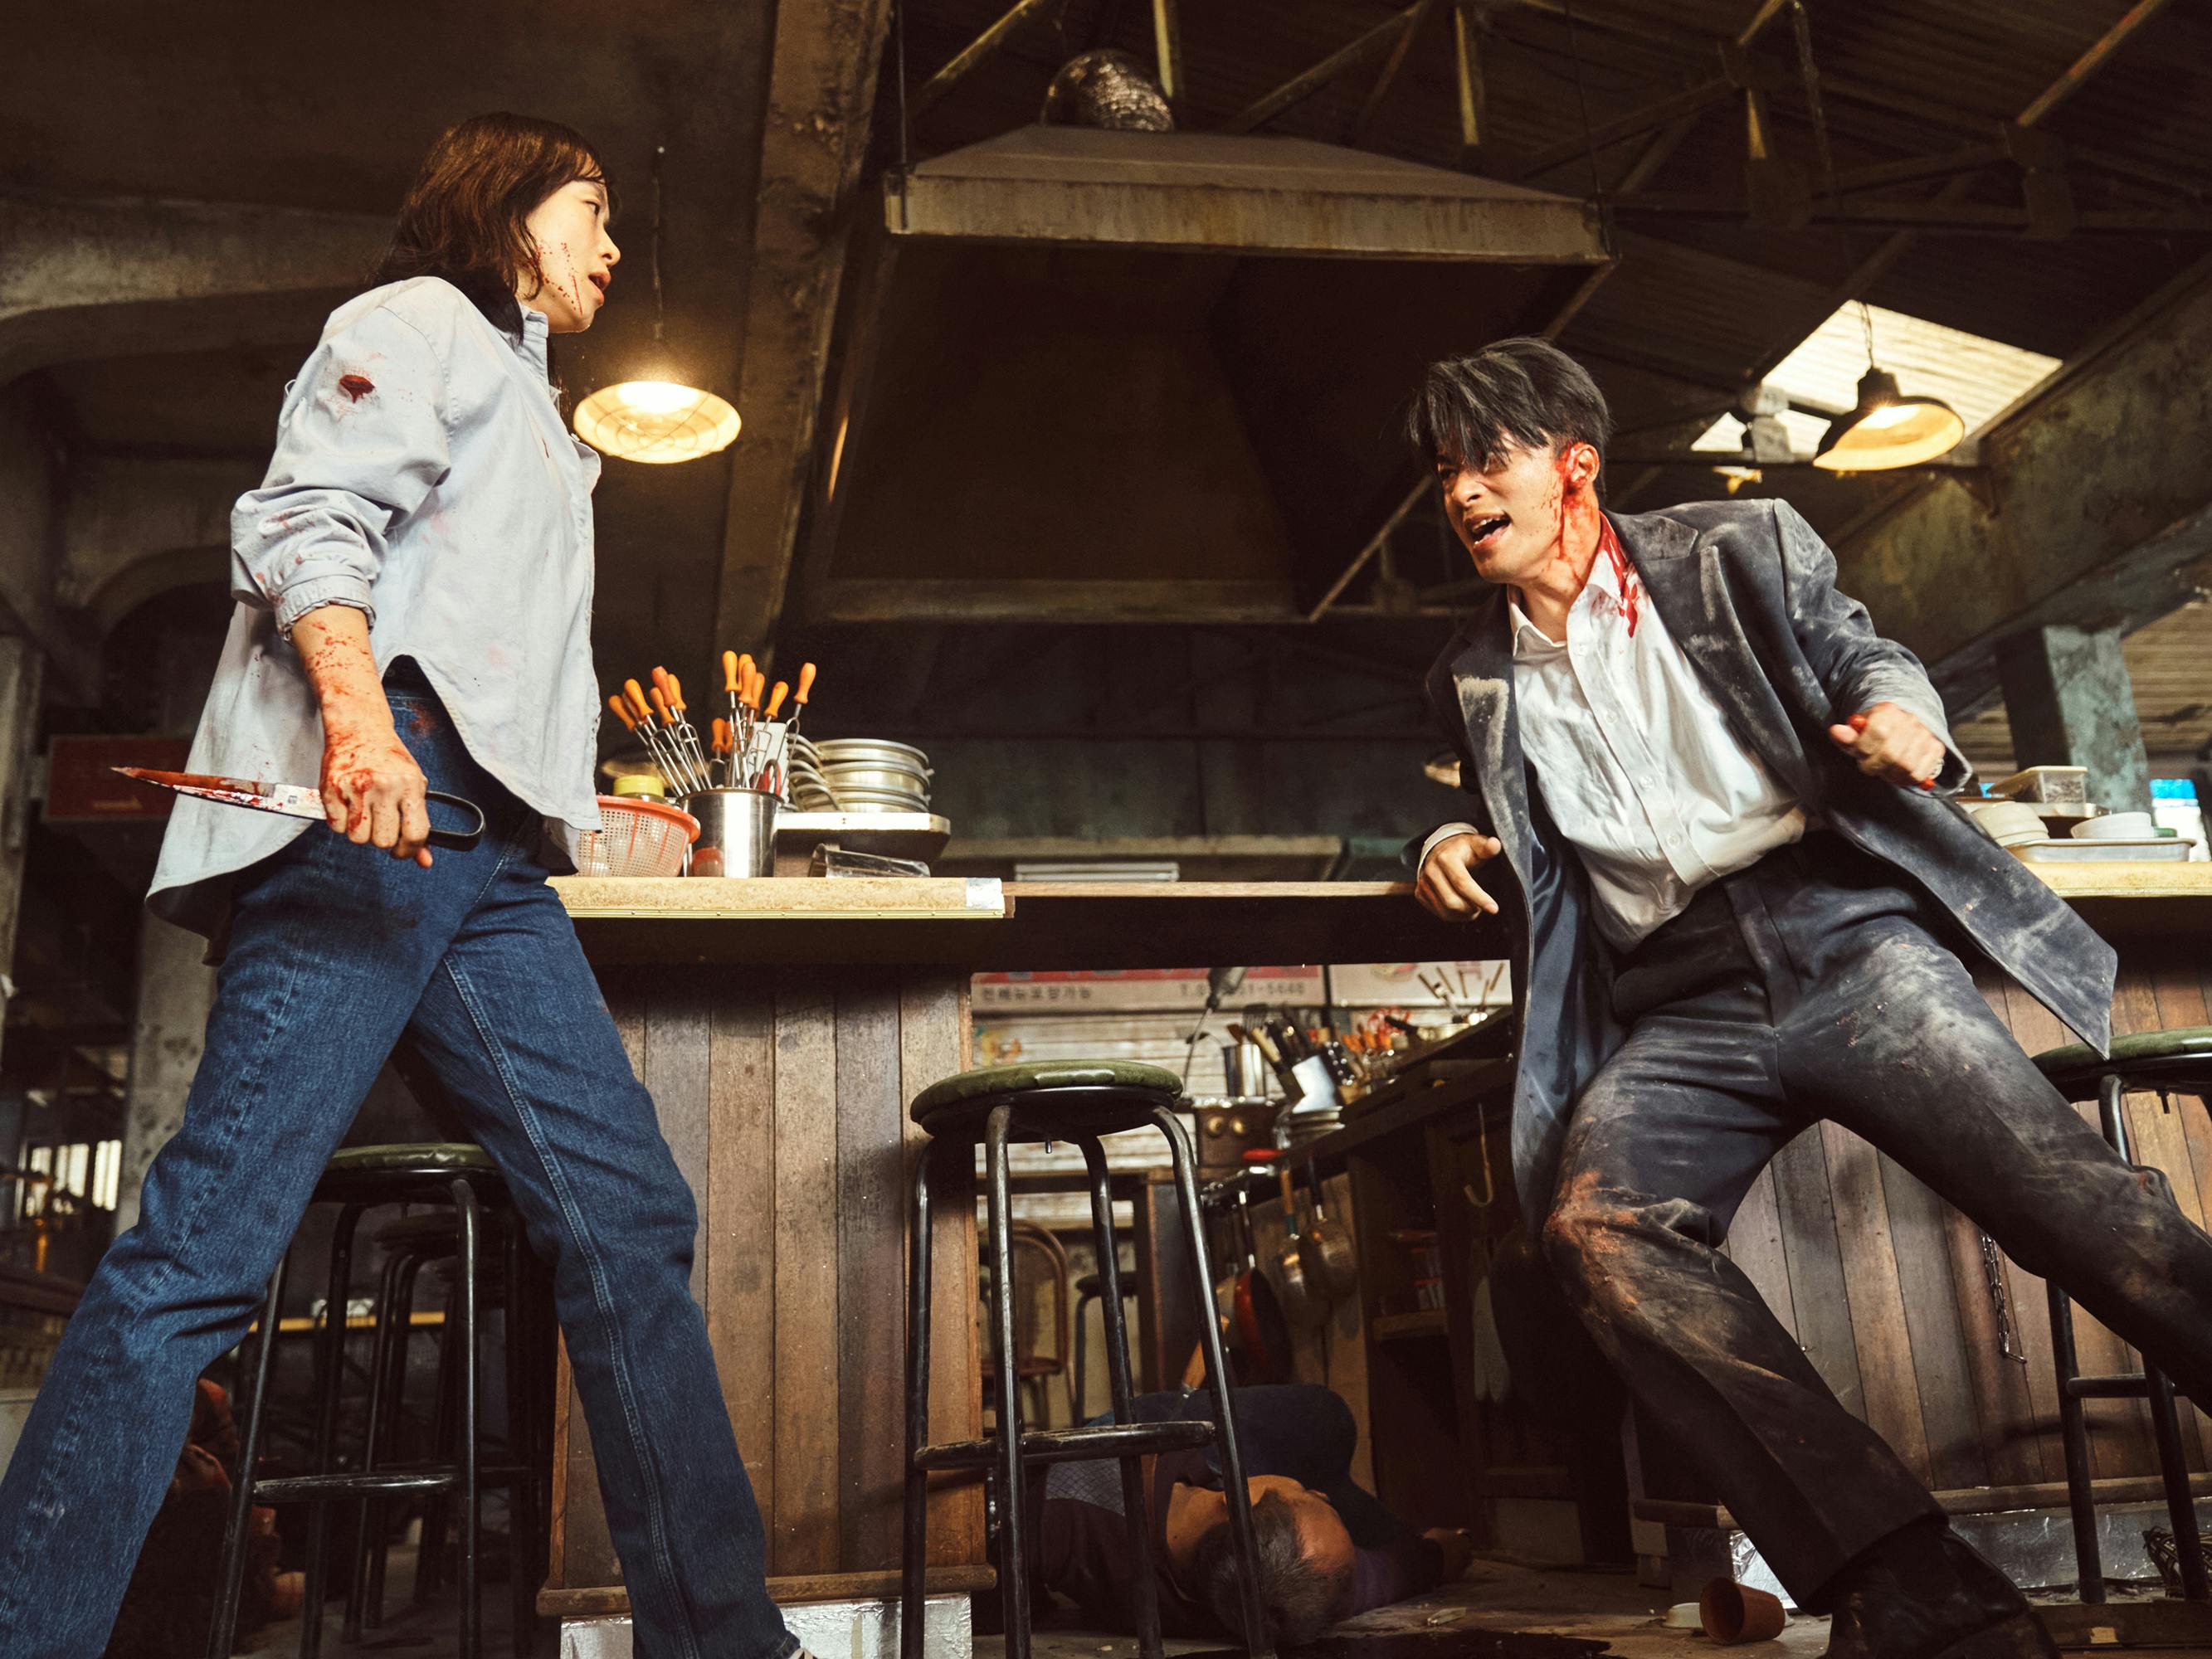 Gil Boksoon (Jeon Do-yeon) and Han Hee-sung (Koo Kyo-hwan) face off in a wood-paneled diner.